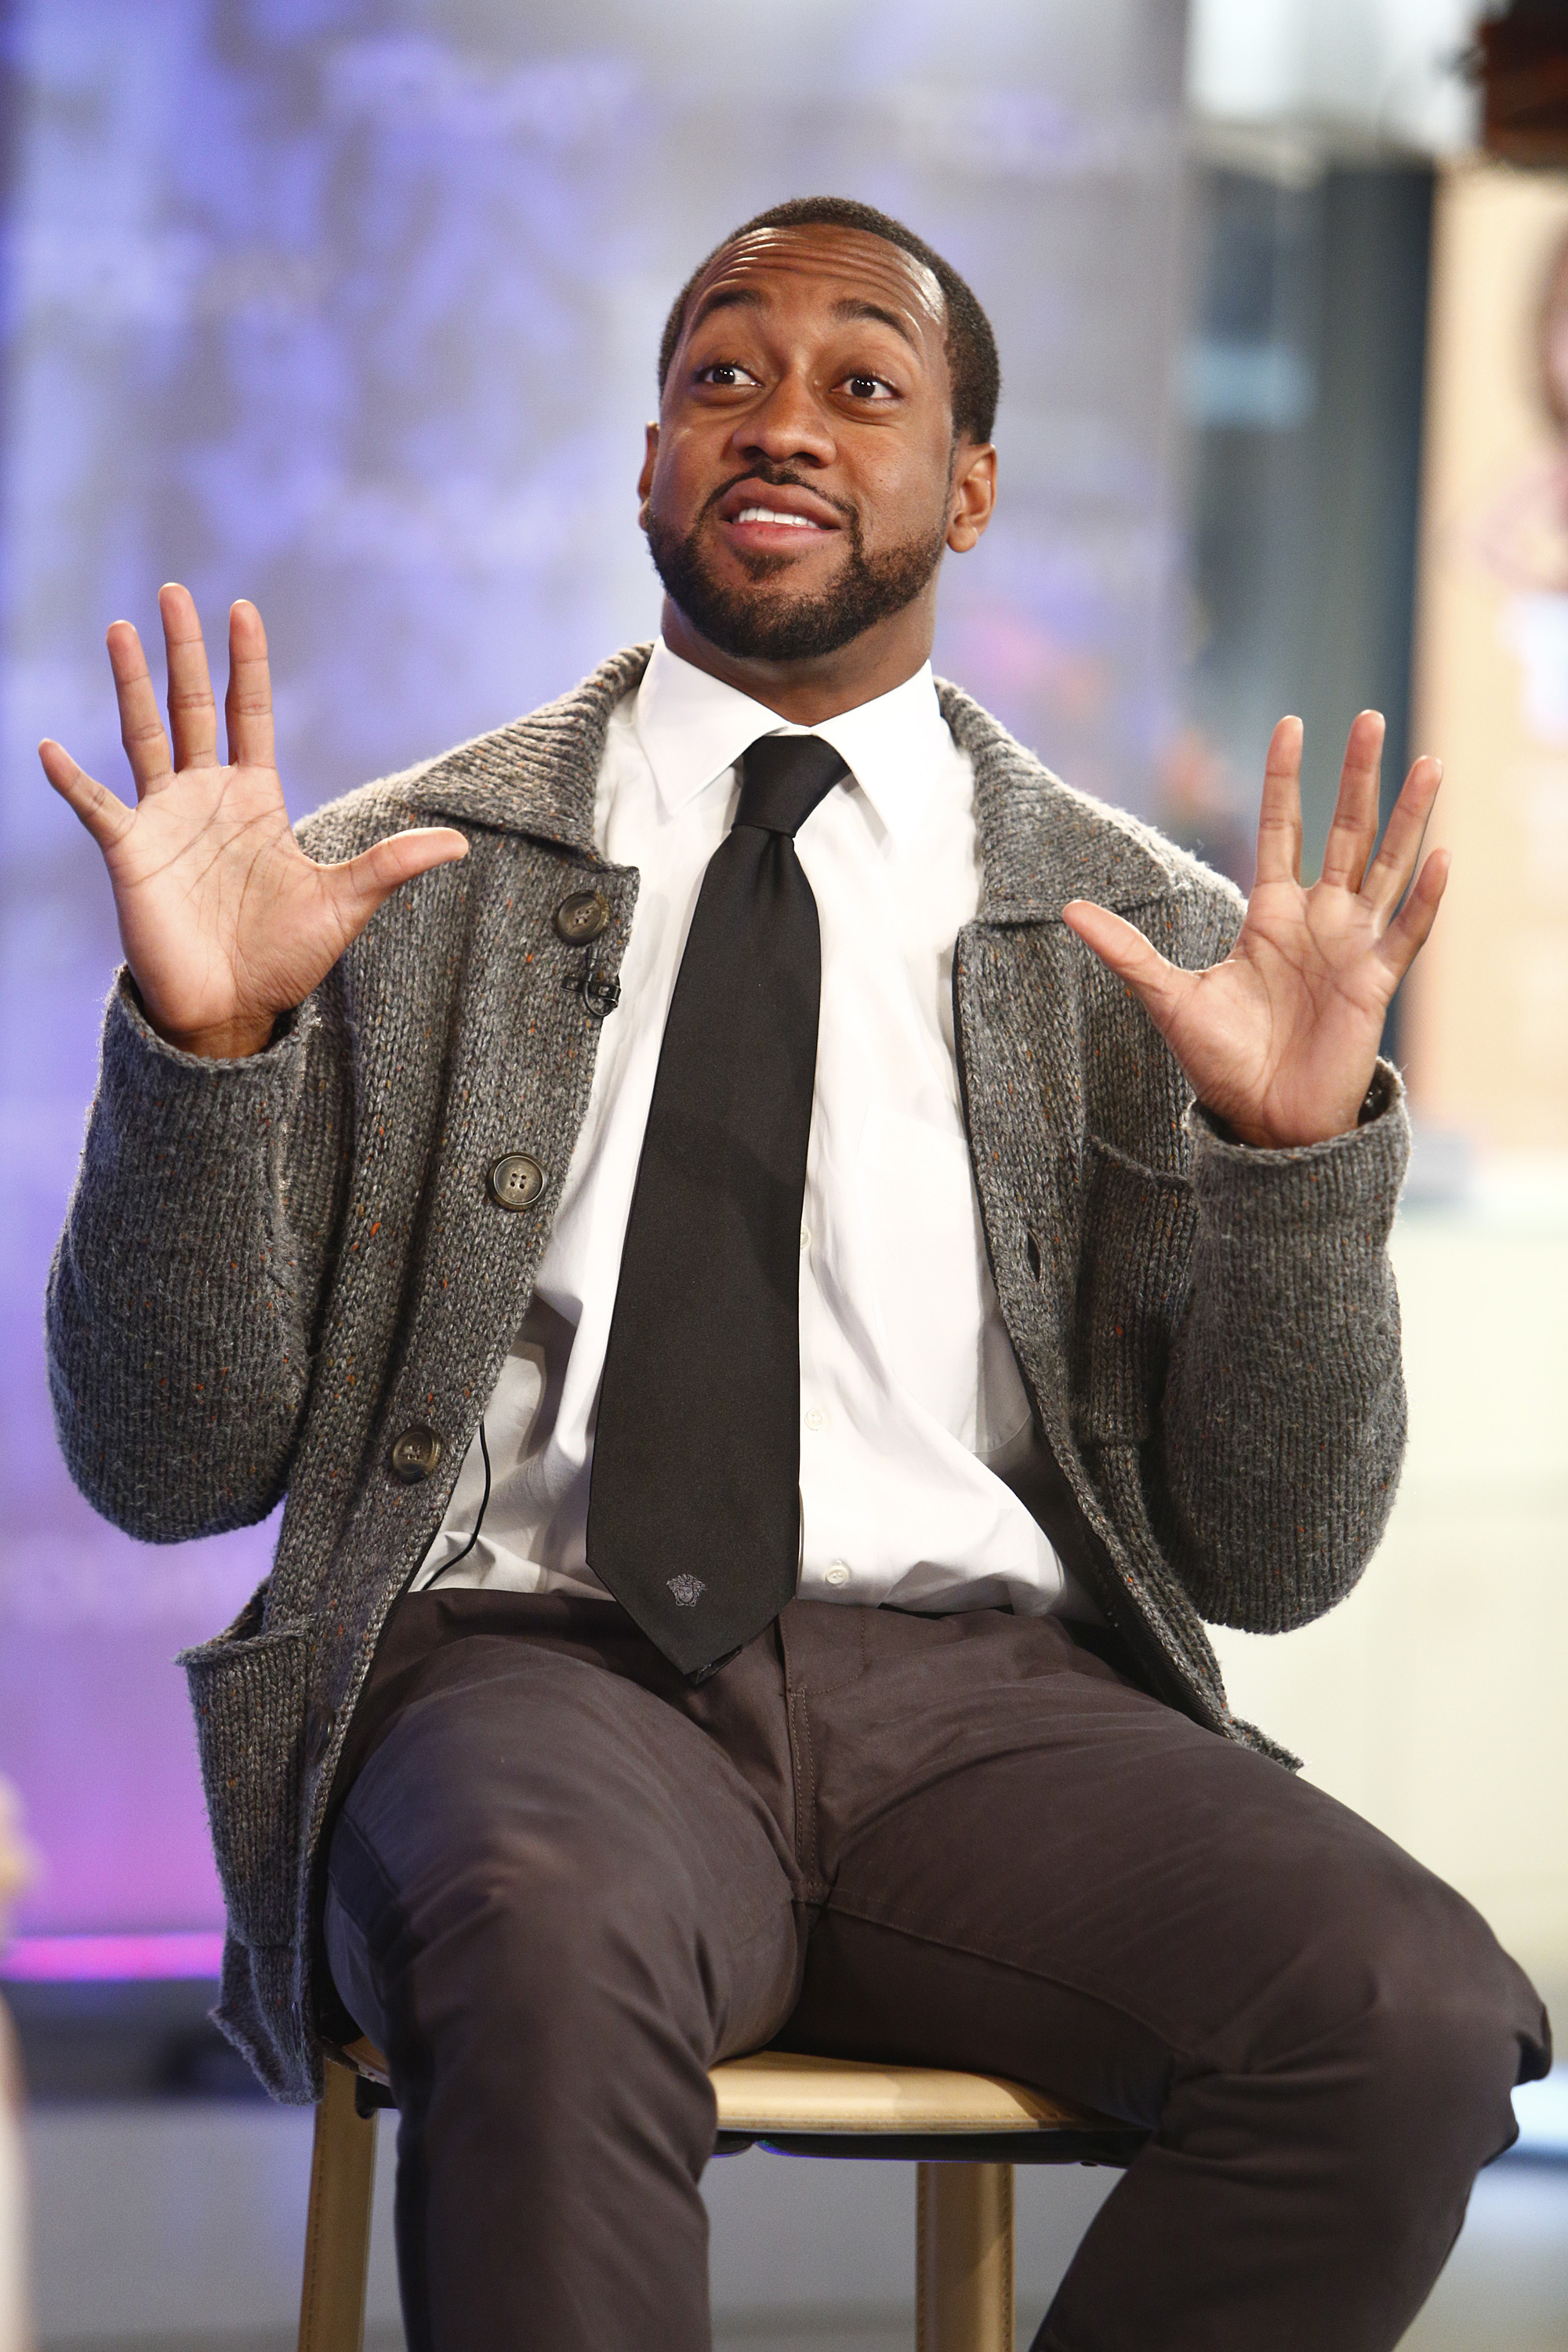 Jaleel White on the "Today" show on October 23, 2012 | Source: Getty Images